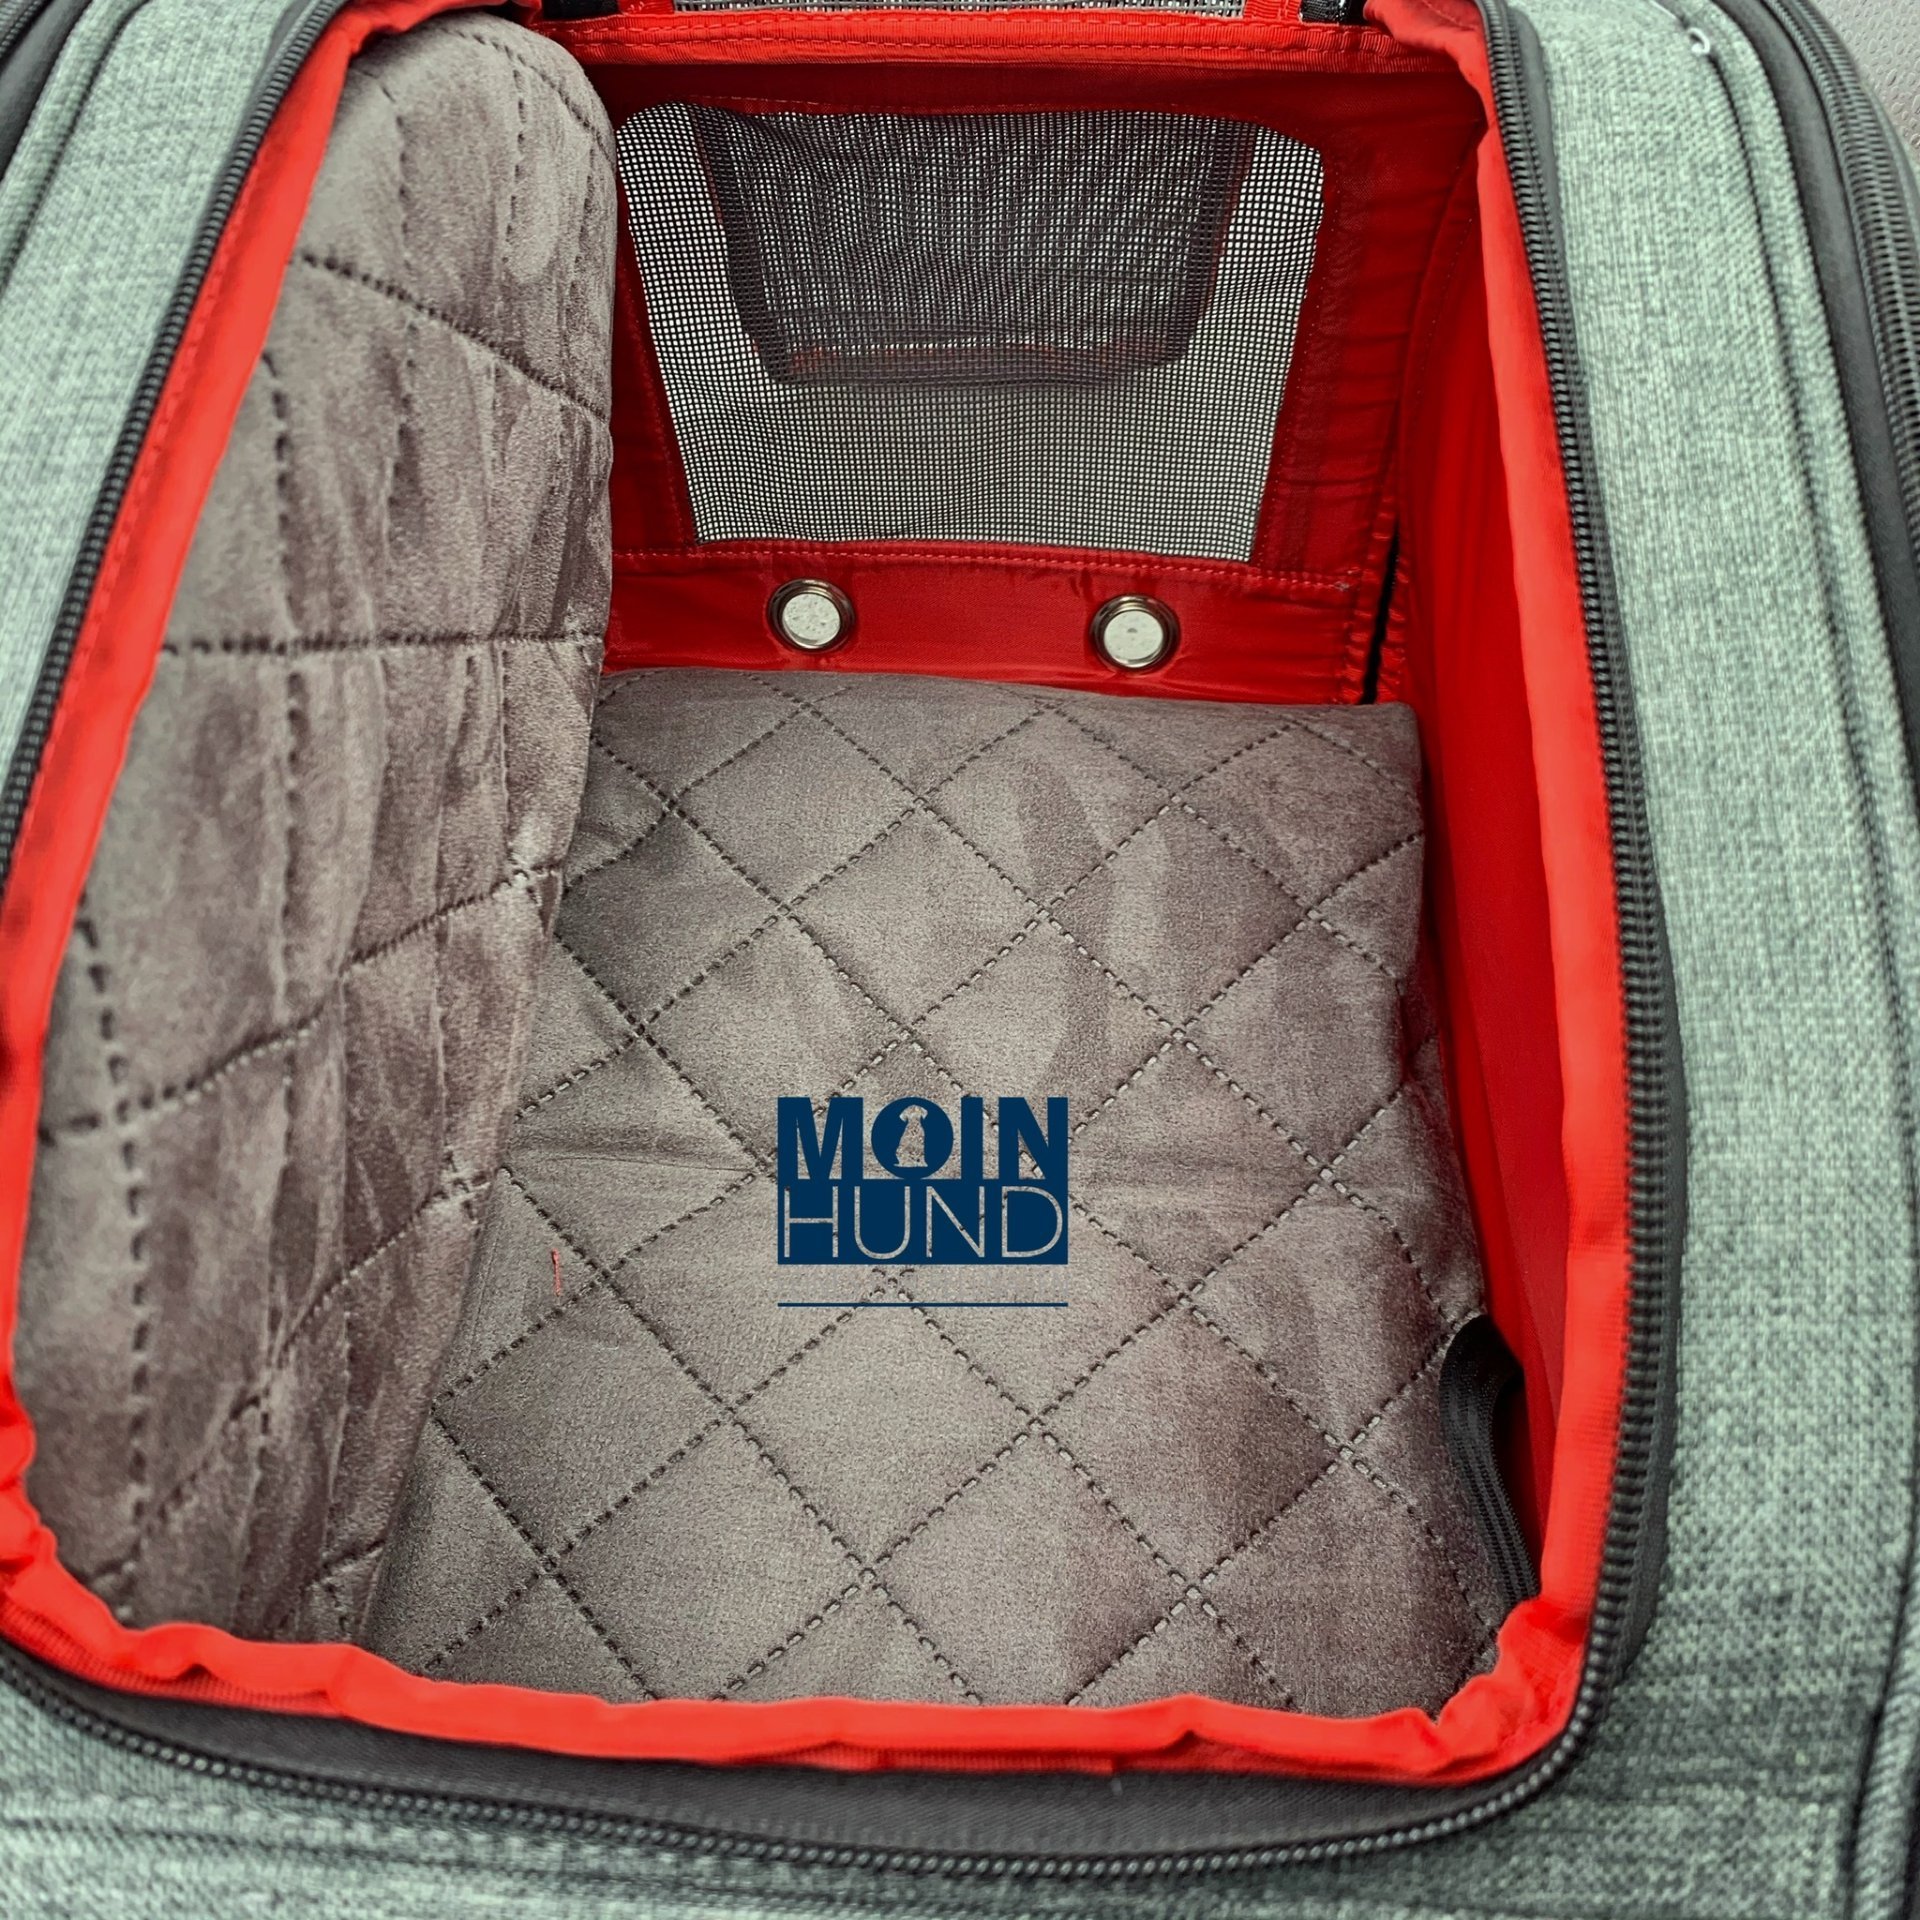 Kong - 2-in-1 Pet Carrier and Travel Mat